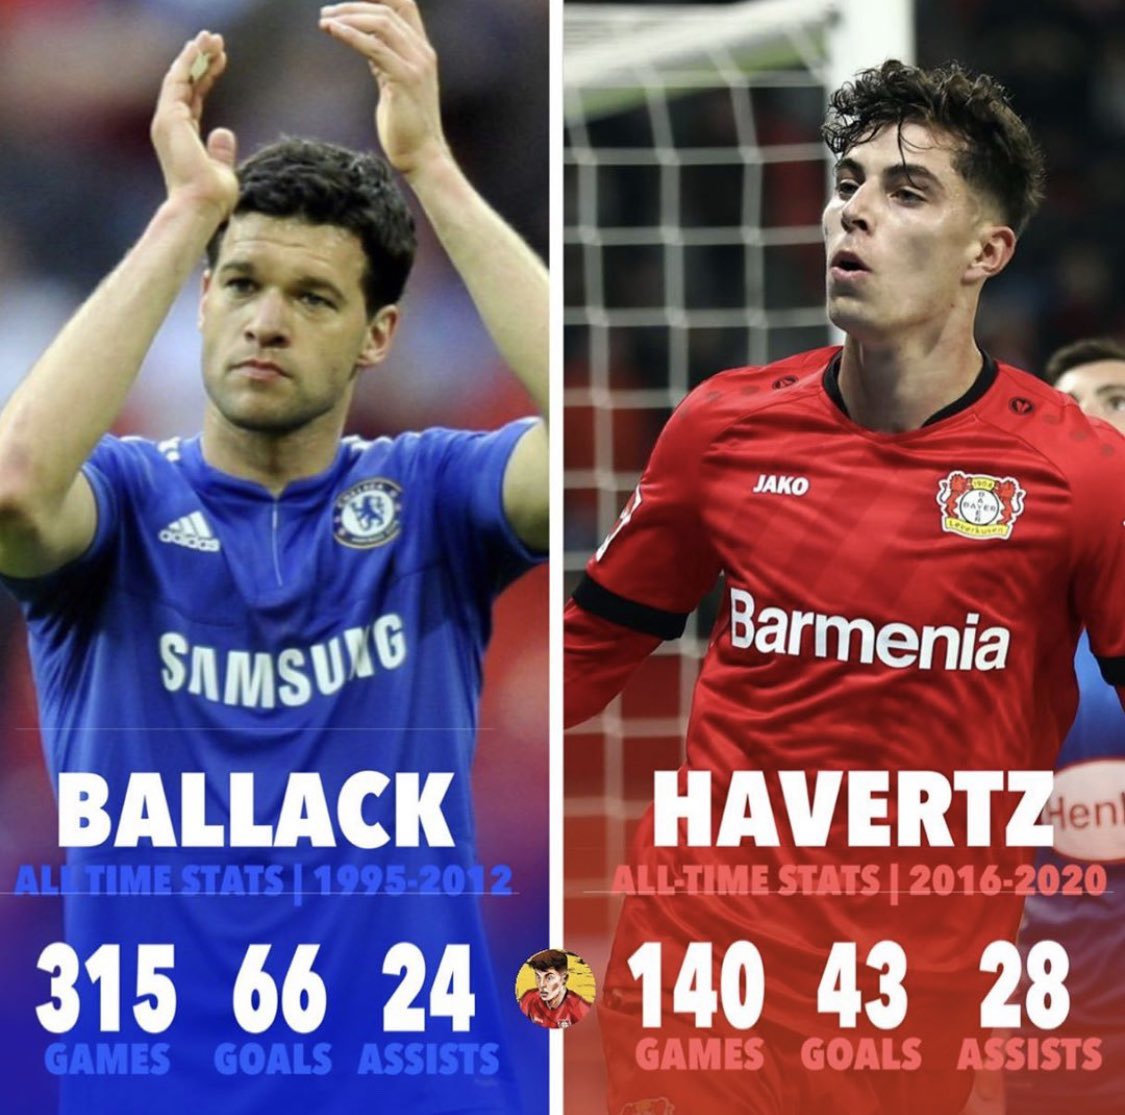 Frank Khalid على تويتر Kai Havertz Has Been Compared To Ballack Here Are Both Their Stats Kai Havertz At Such A Young Age Has Great Stats Will Have An Amazing Future